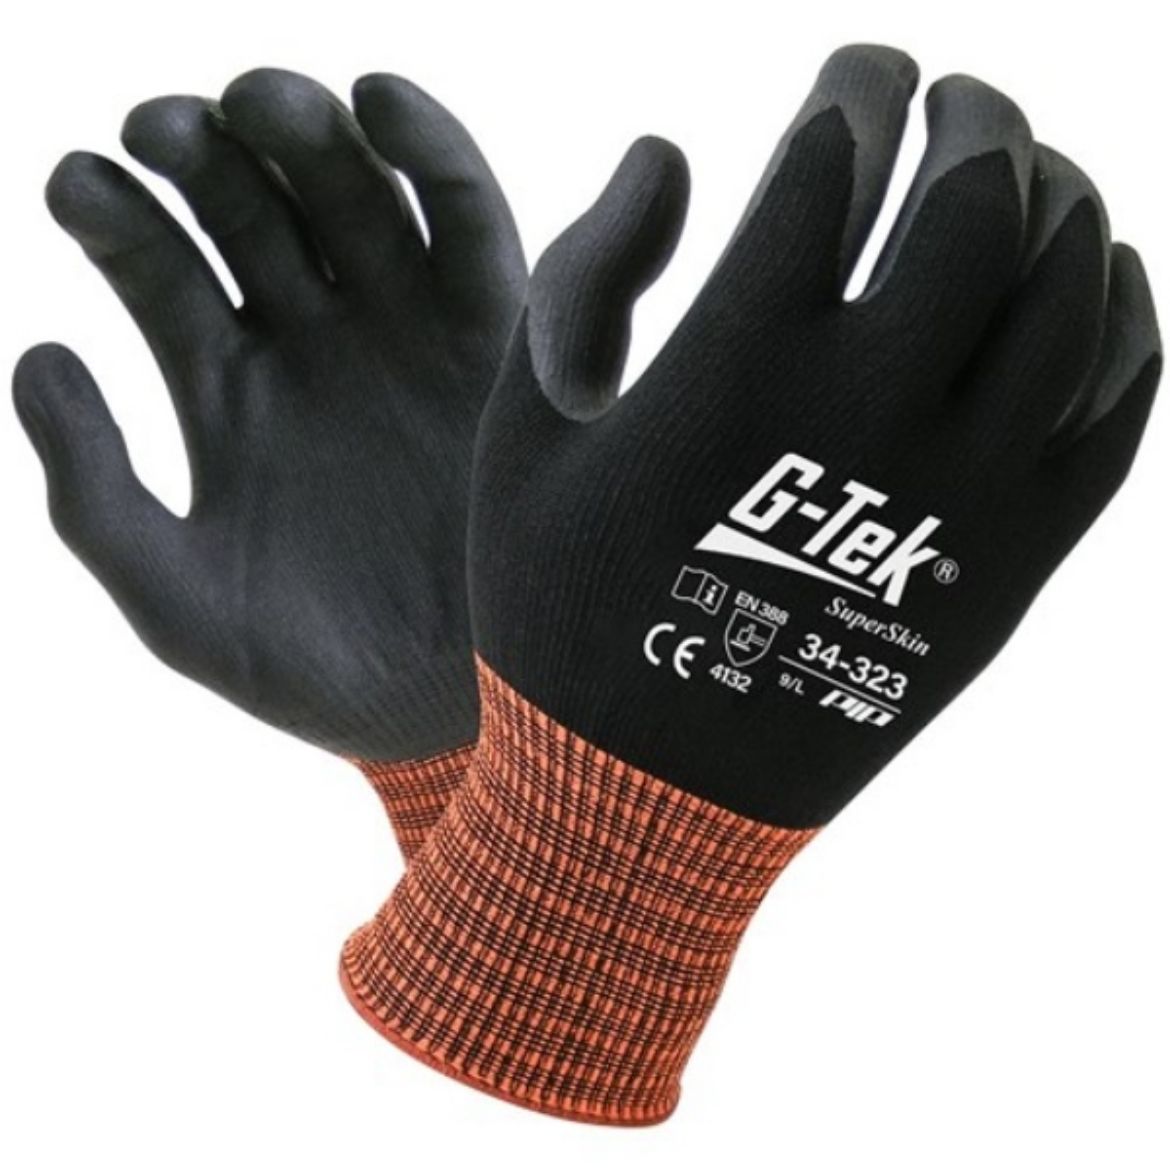 Picture of G-TEK (GUARDTEK) SUPERSKIN GLOVES. MOQ - 12. AVAILABLE IN SIZES 6 TO 11.